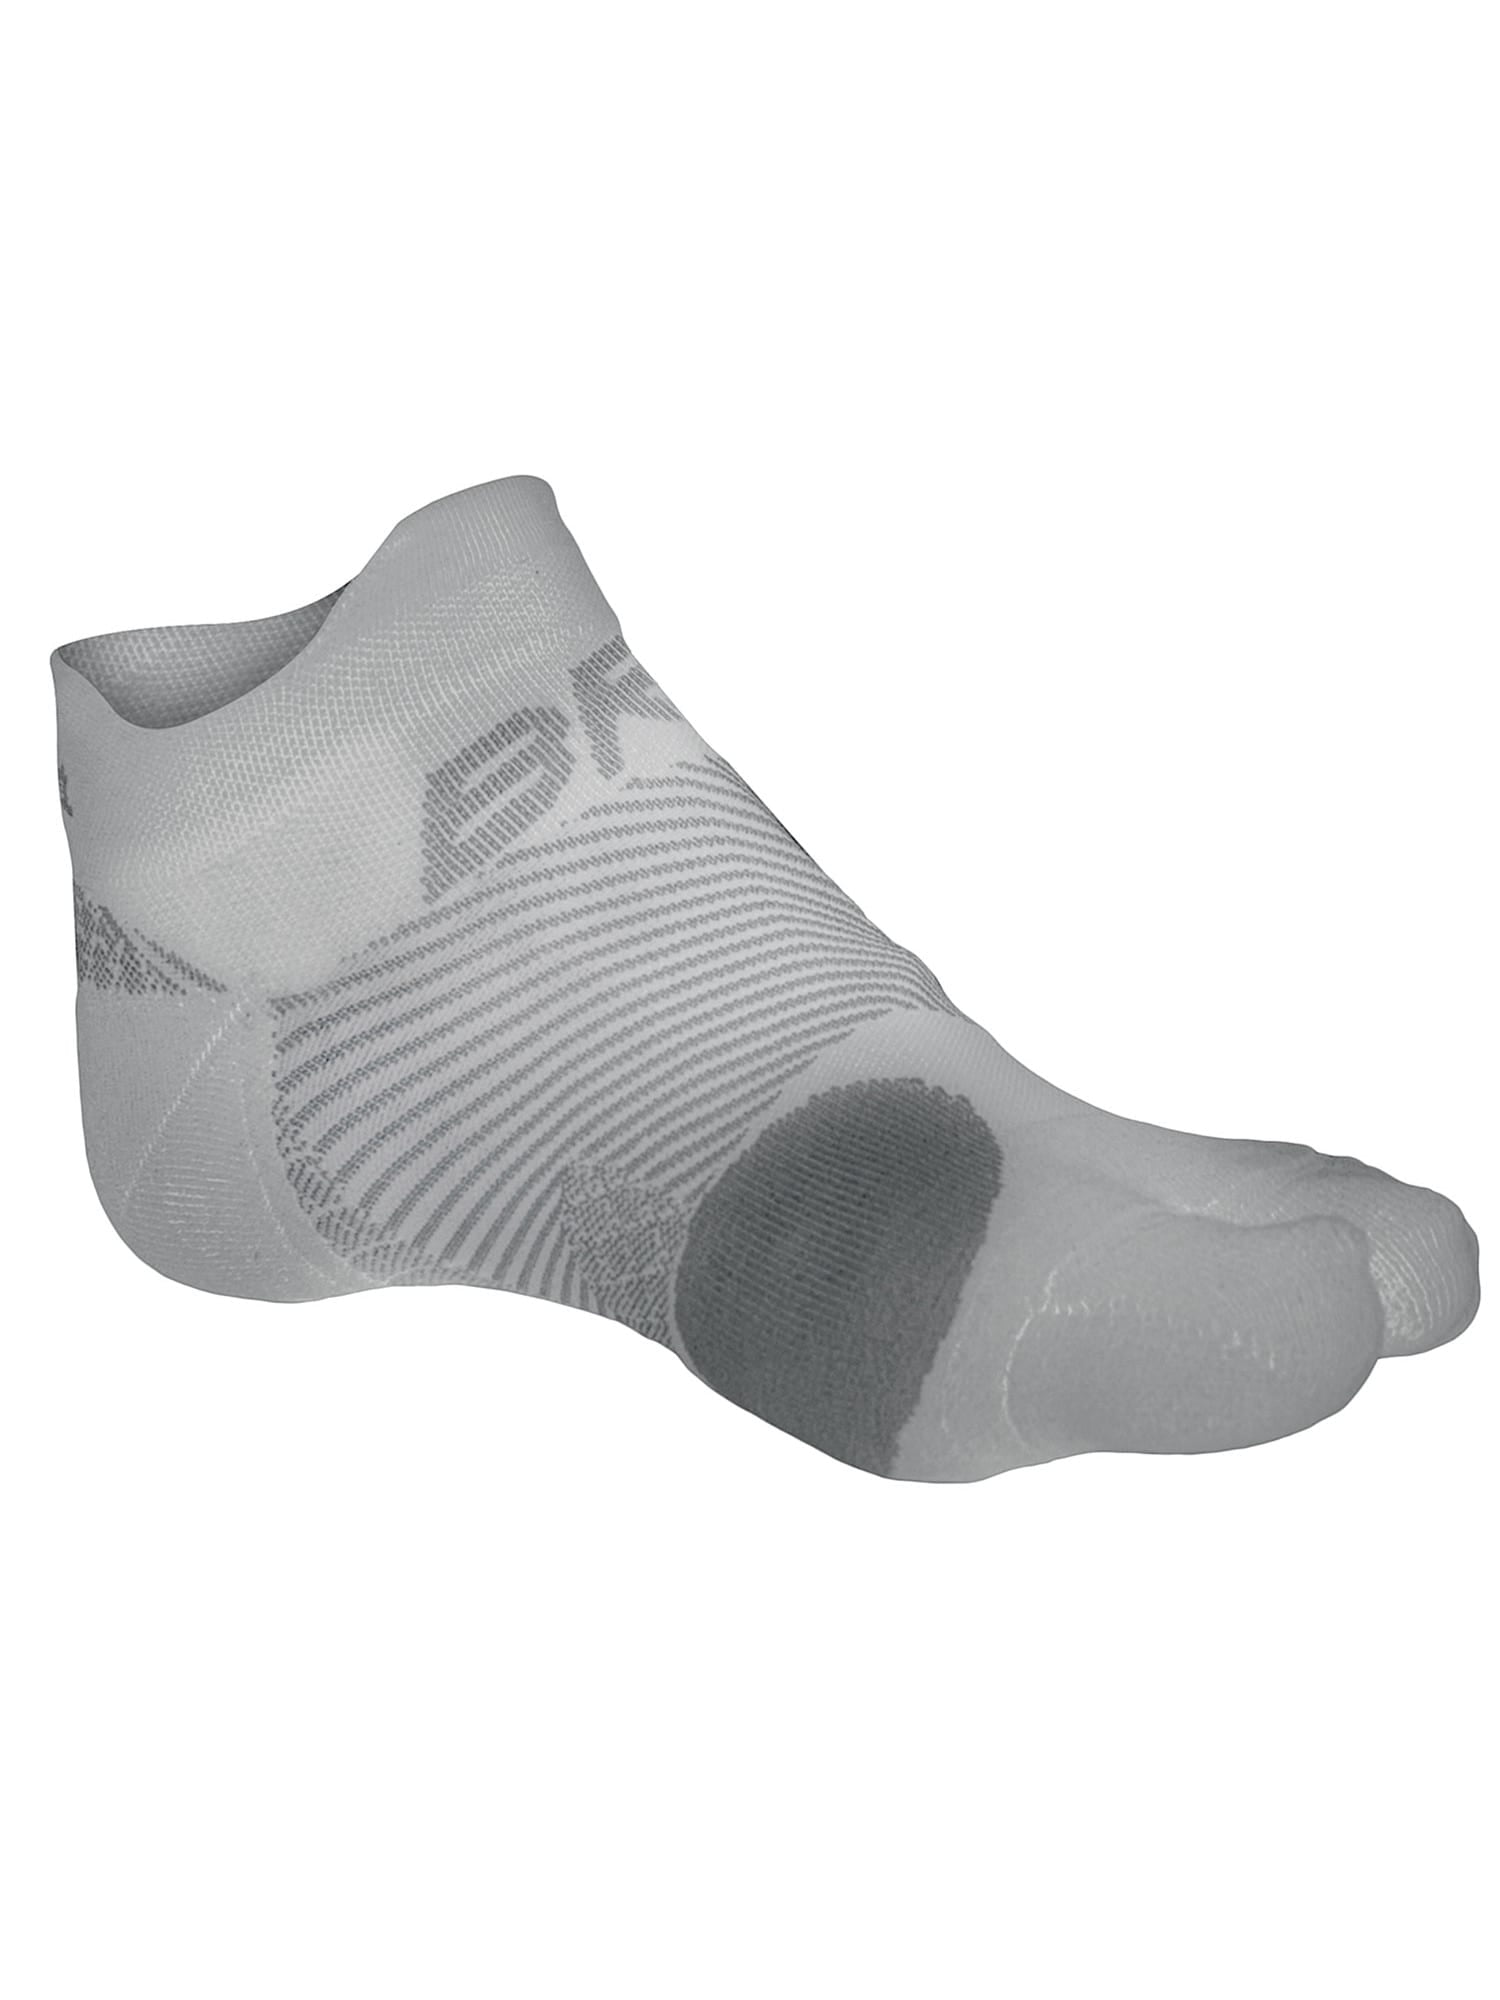 Orthosleeve BR04 Bunion Relief Socks w. Compression - Moisture Wicking  Split Toe - Gray - Large